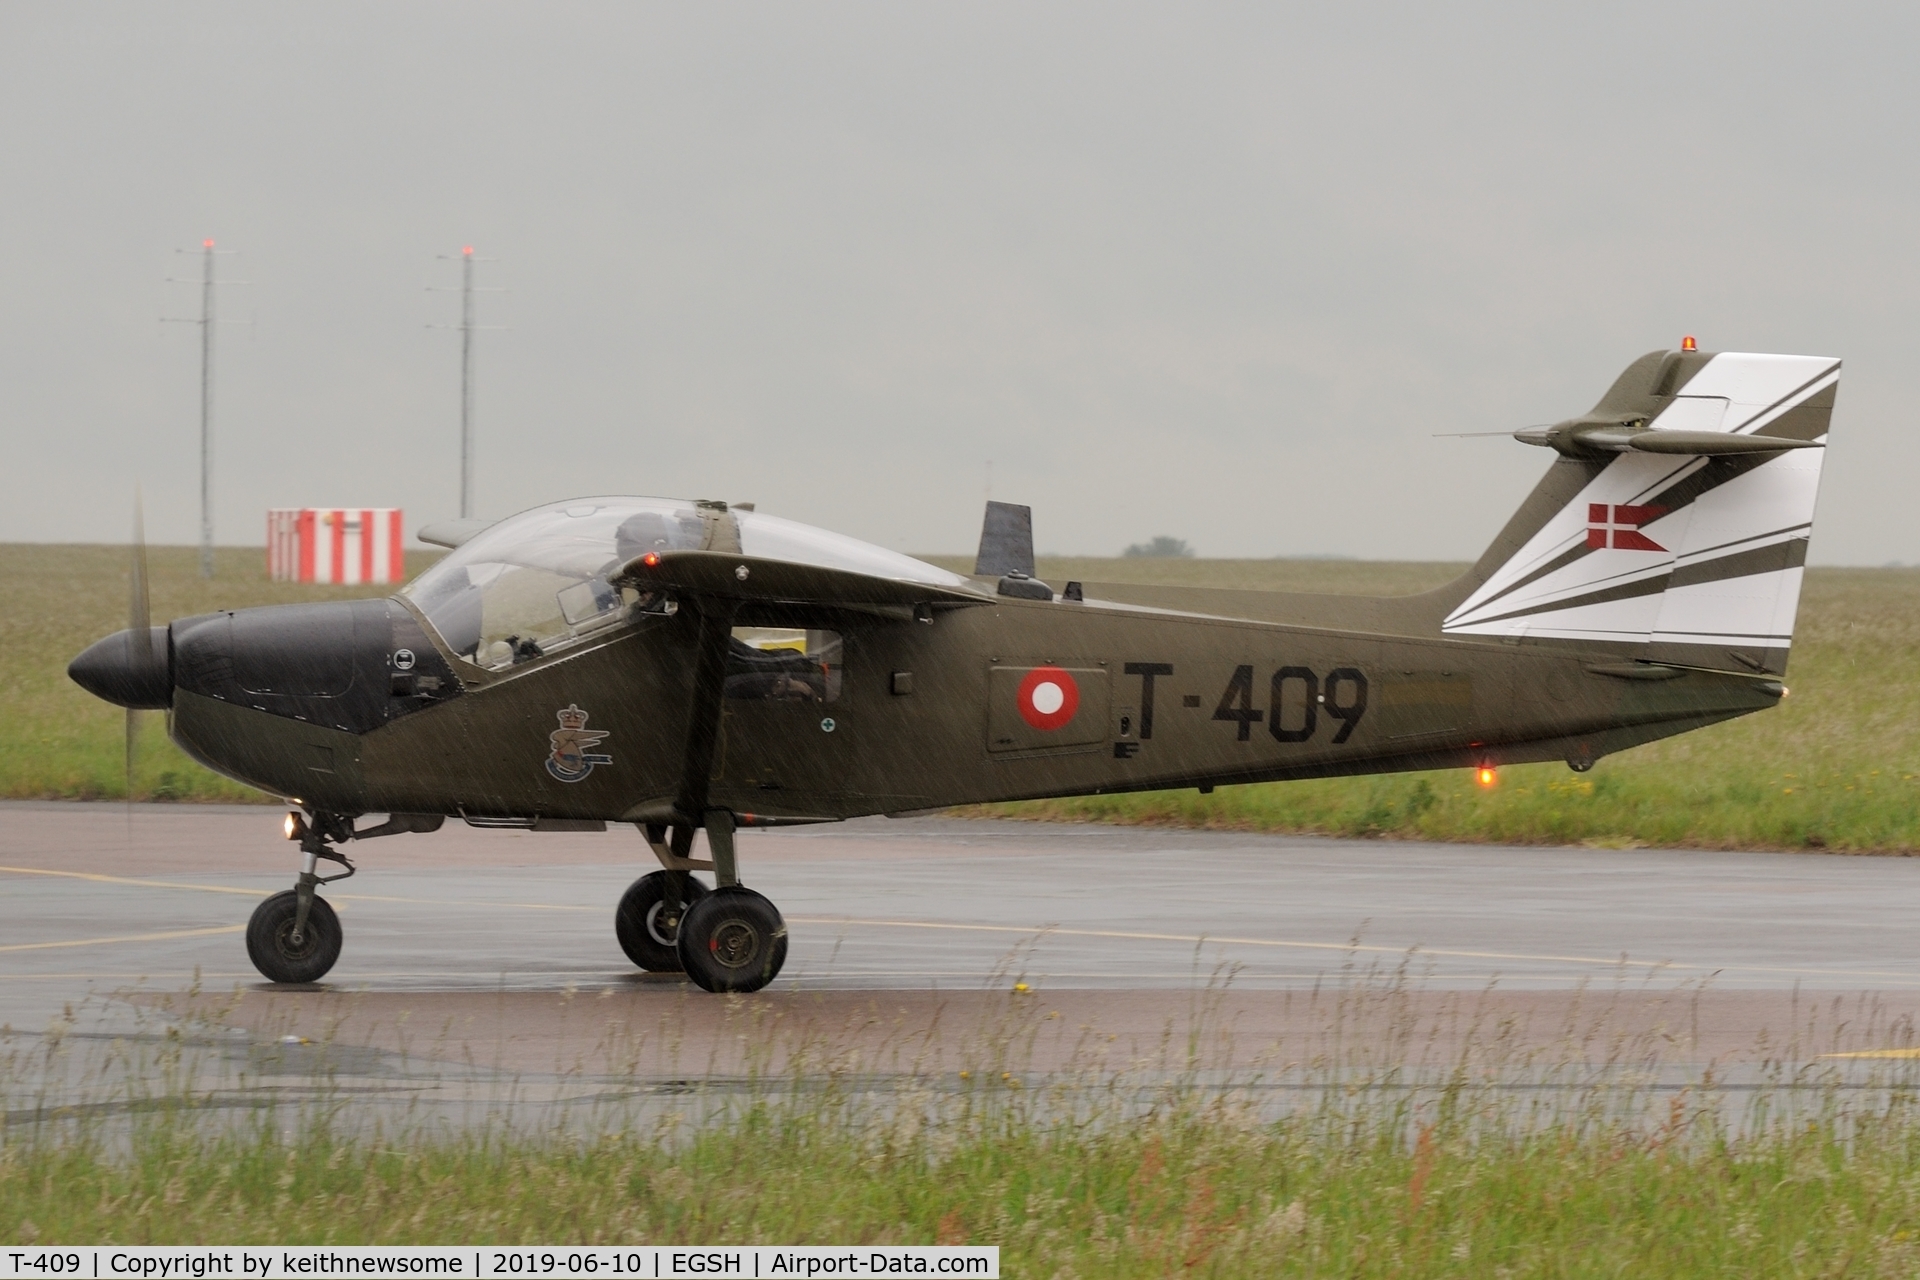 T-409, Saab T-17 Supporter C/N 15-209, Arriving at very wet Norwich.